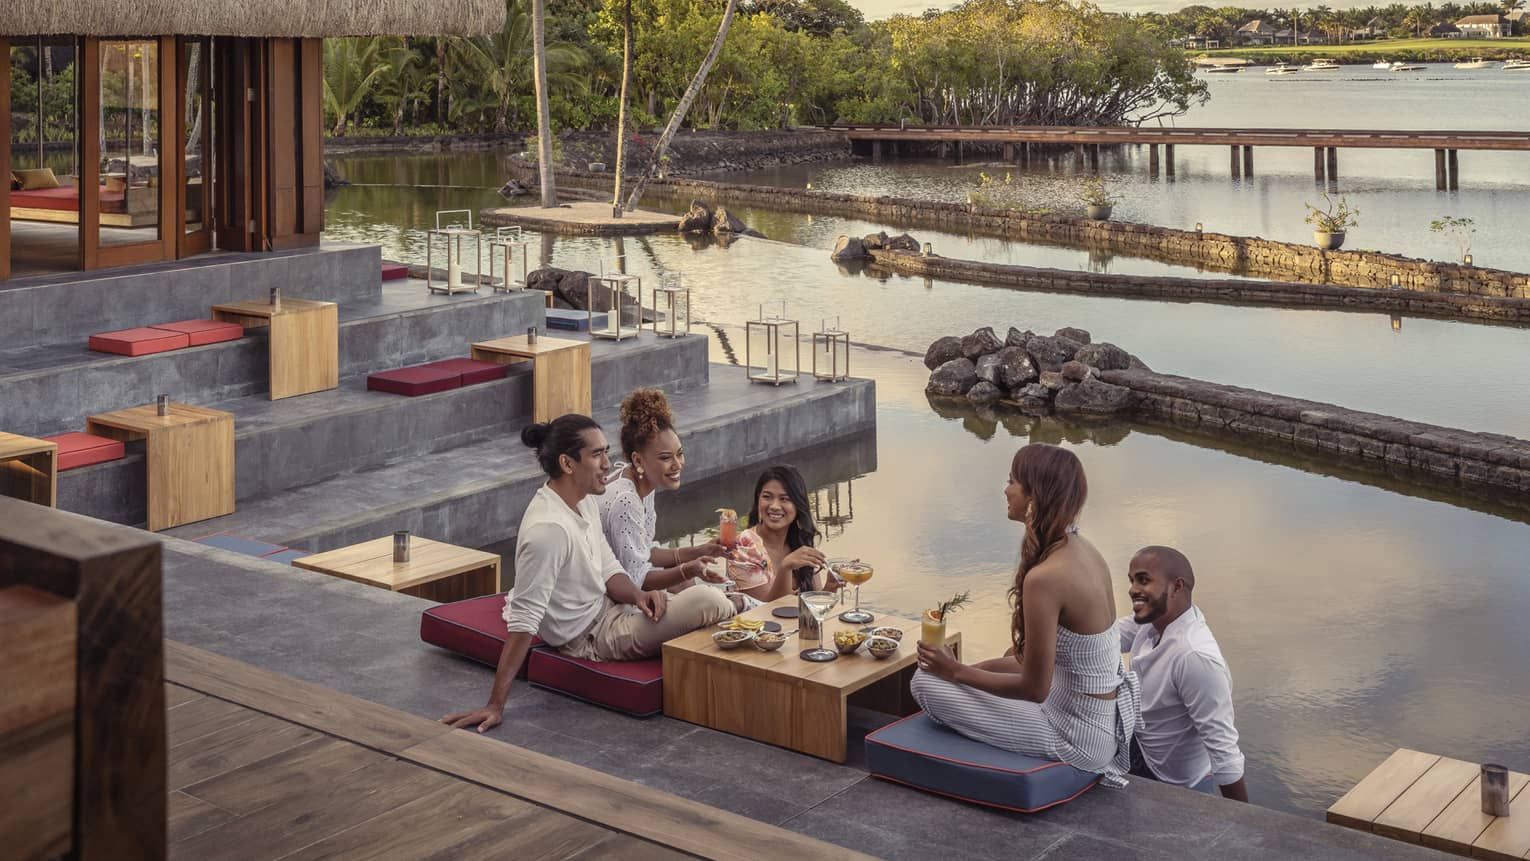 Five friends sitting and talking over food and drinks at outdoor lounge on water